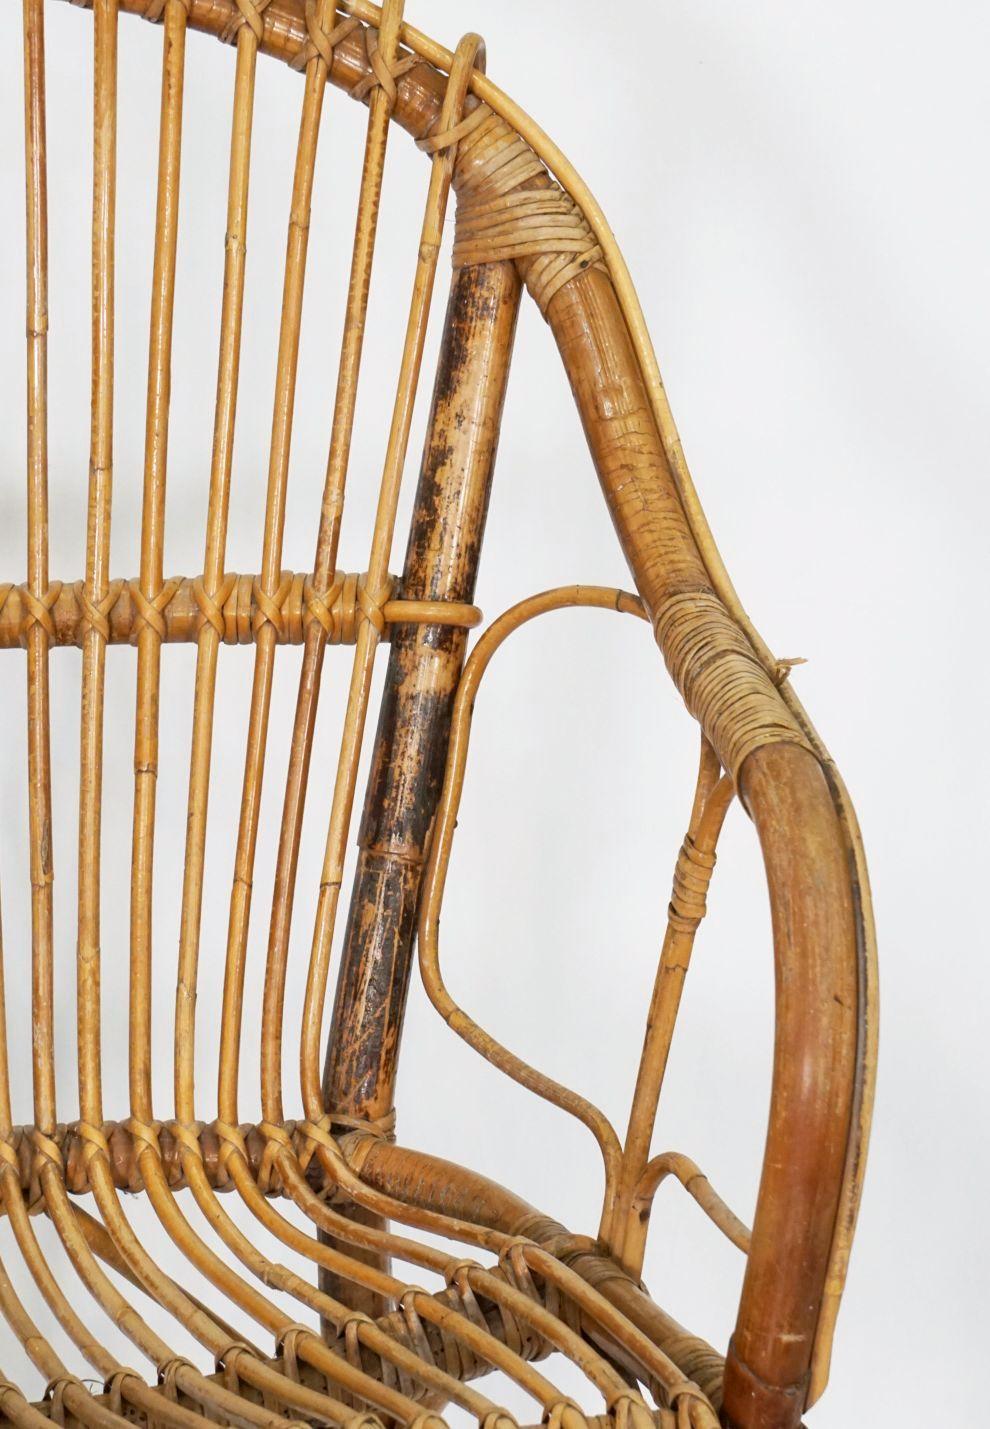 Italian Fan-Backed Arm Chairs of Rattan and Bamboo from the Mid-20th Century For Sale 7